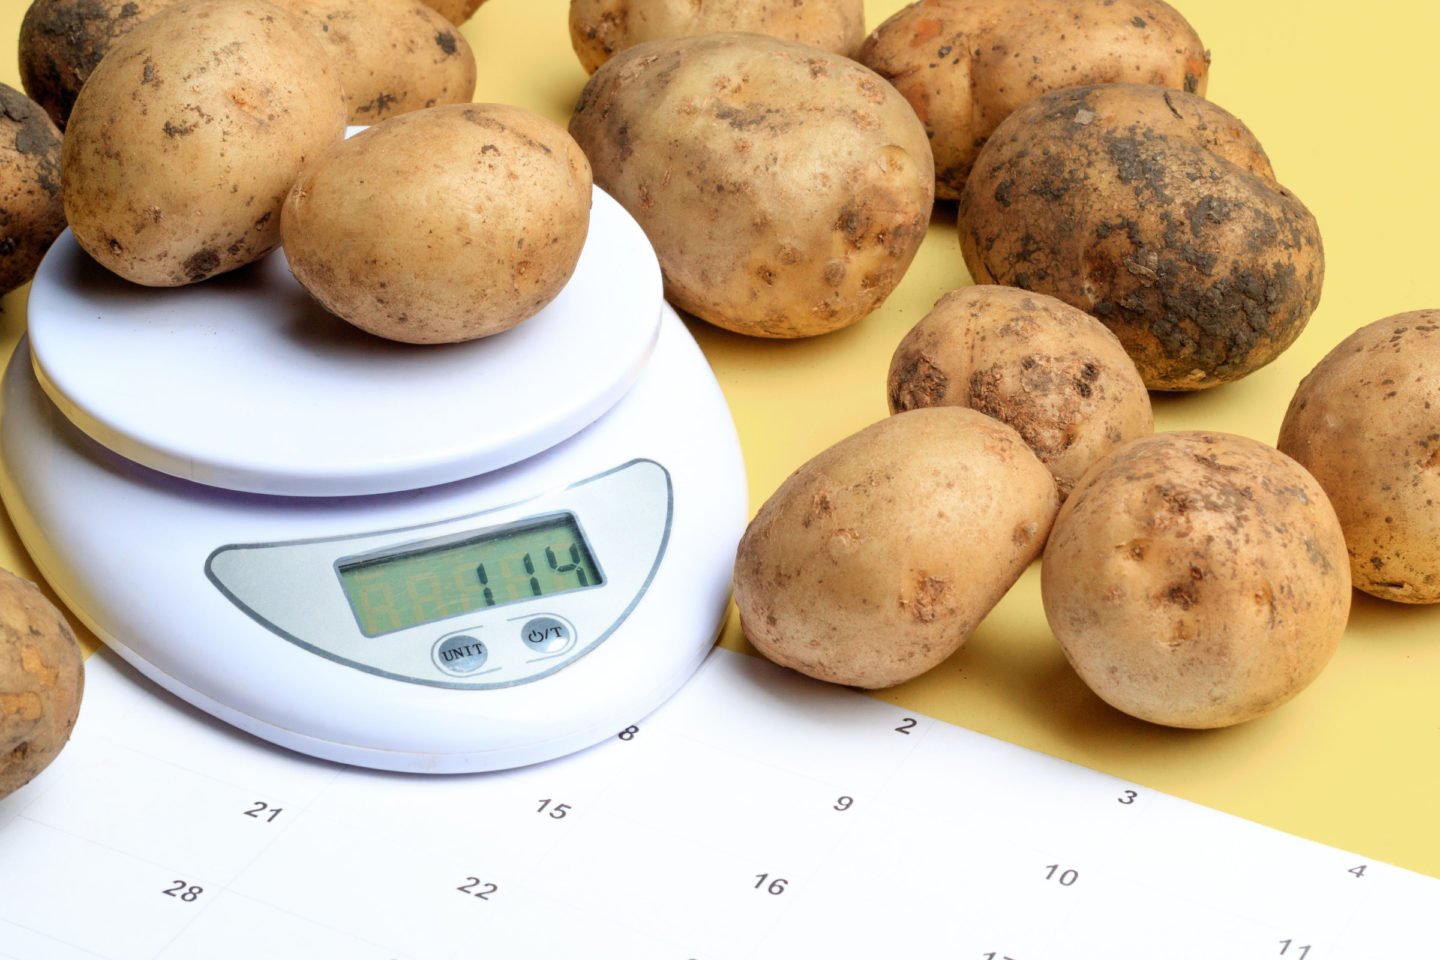 White Potatoes On Weighing Scale